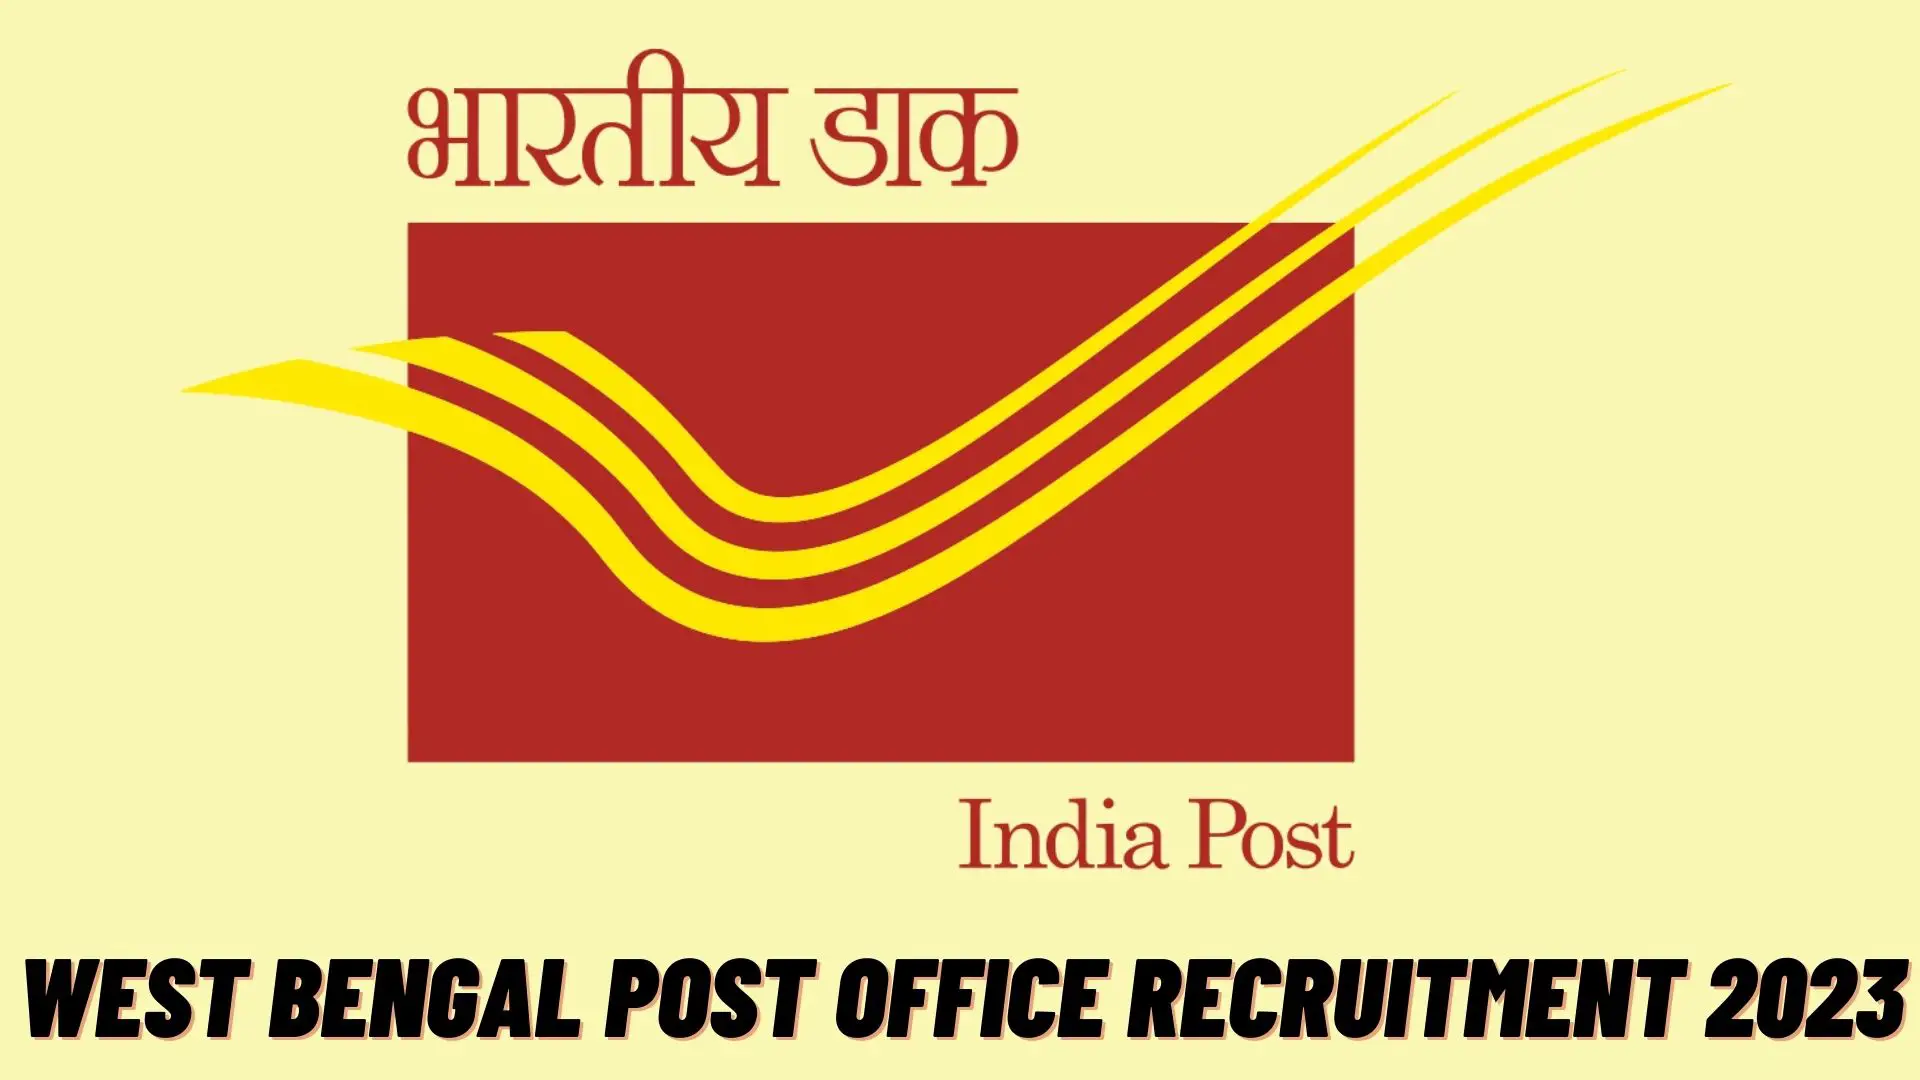 West Bengal Post Office Recruitment 2023